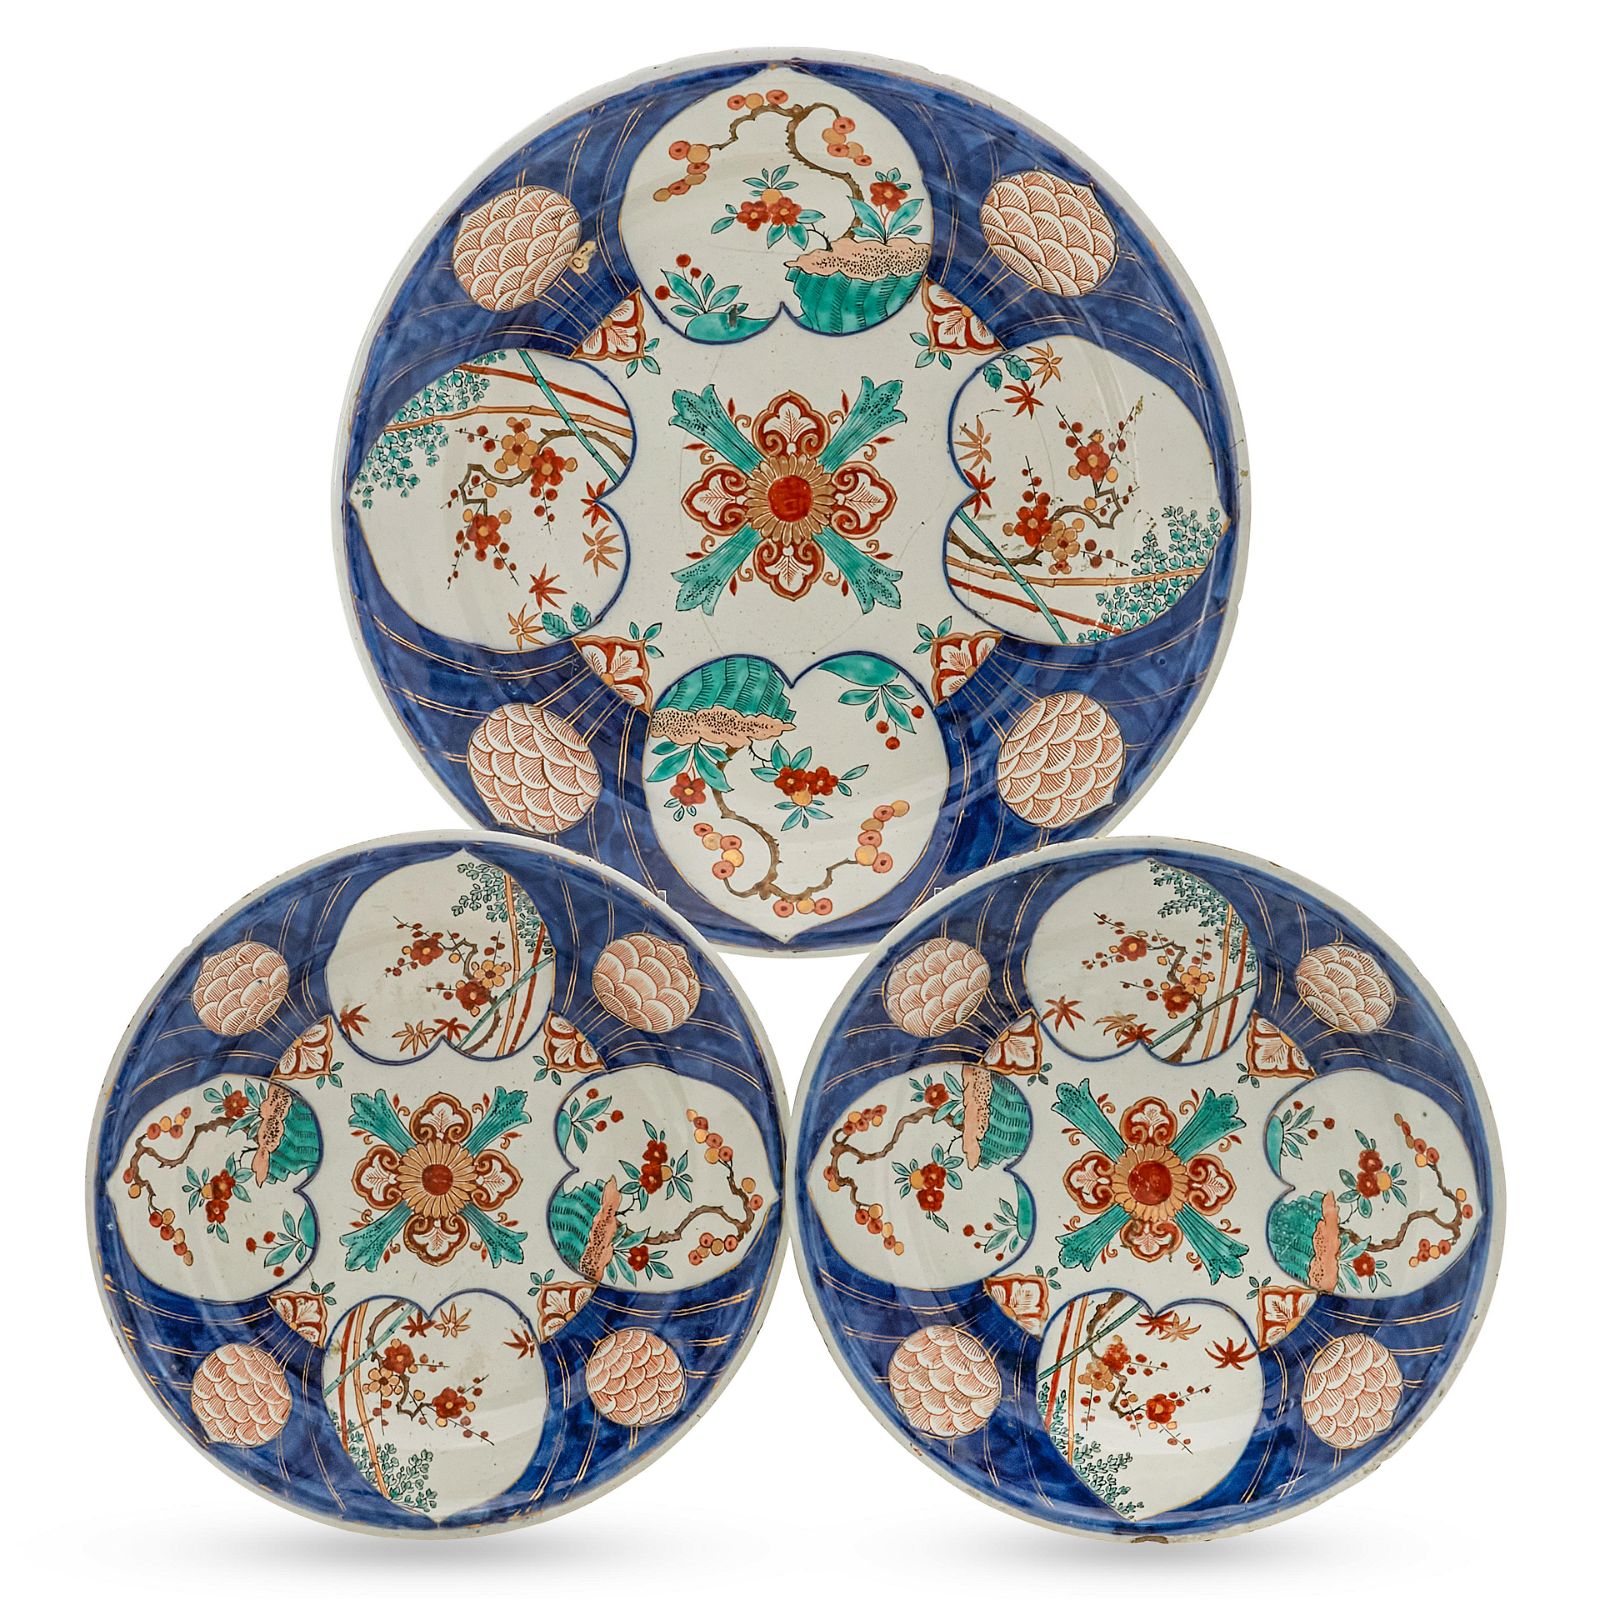 TWO DUTCH DELFT PLATES AND A CHARGERTwo 2fb265a